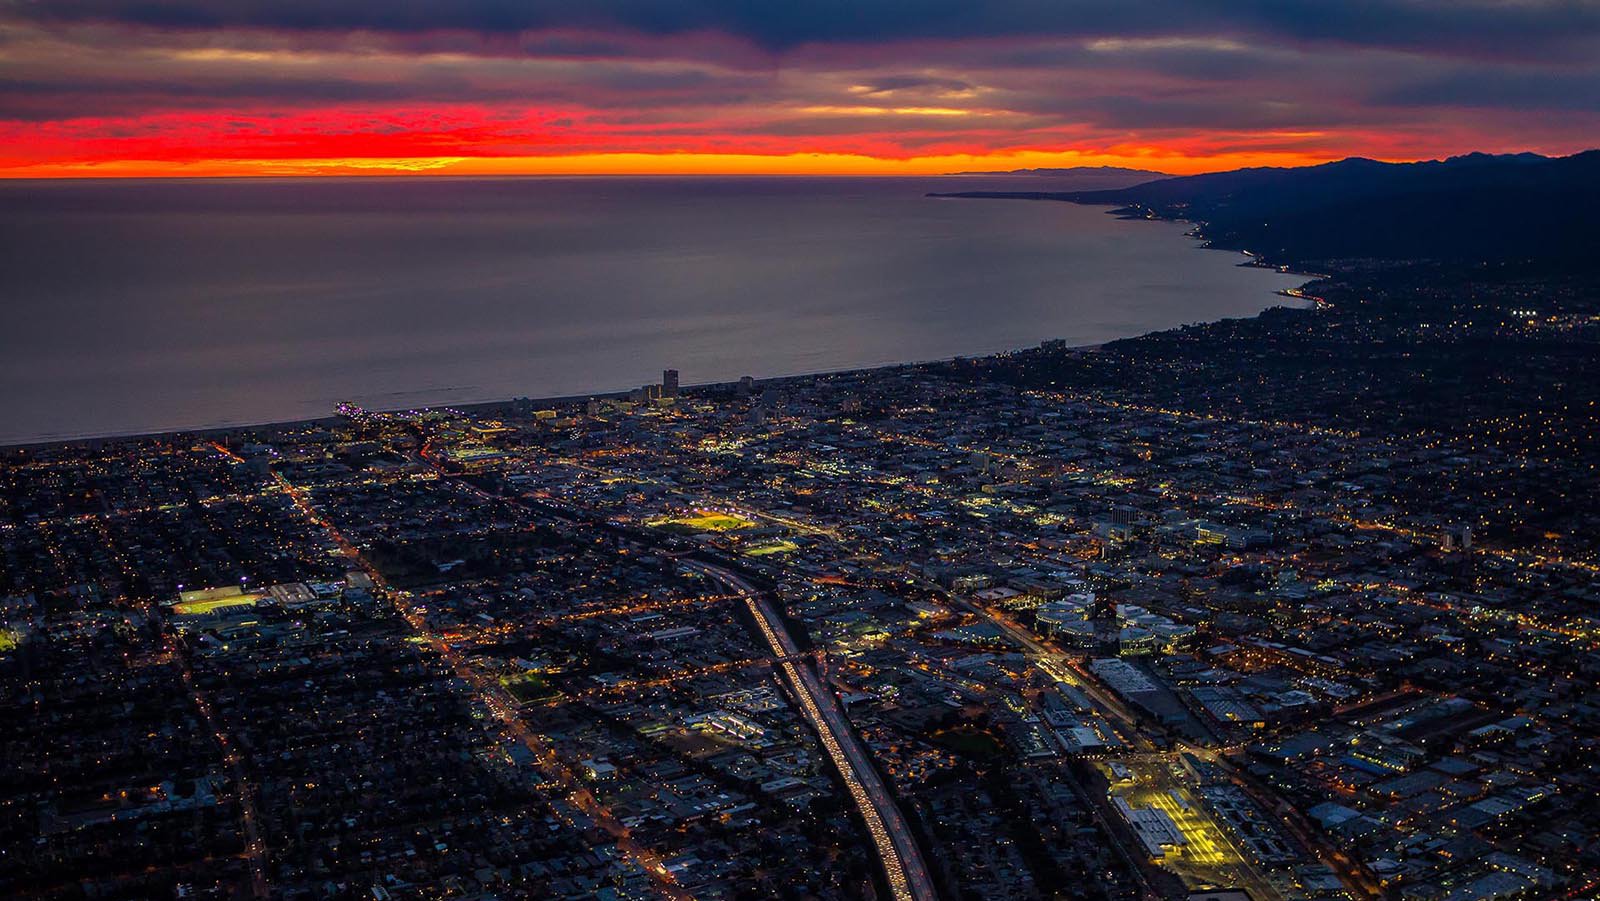 Aerial cityscape of the Santa Monica Bay at Sunset with Santa Cruz Island in the distance